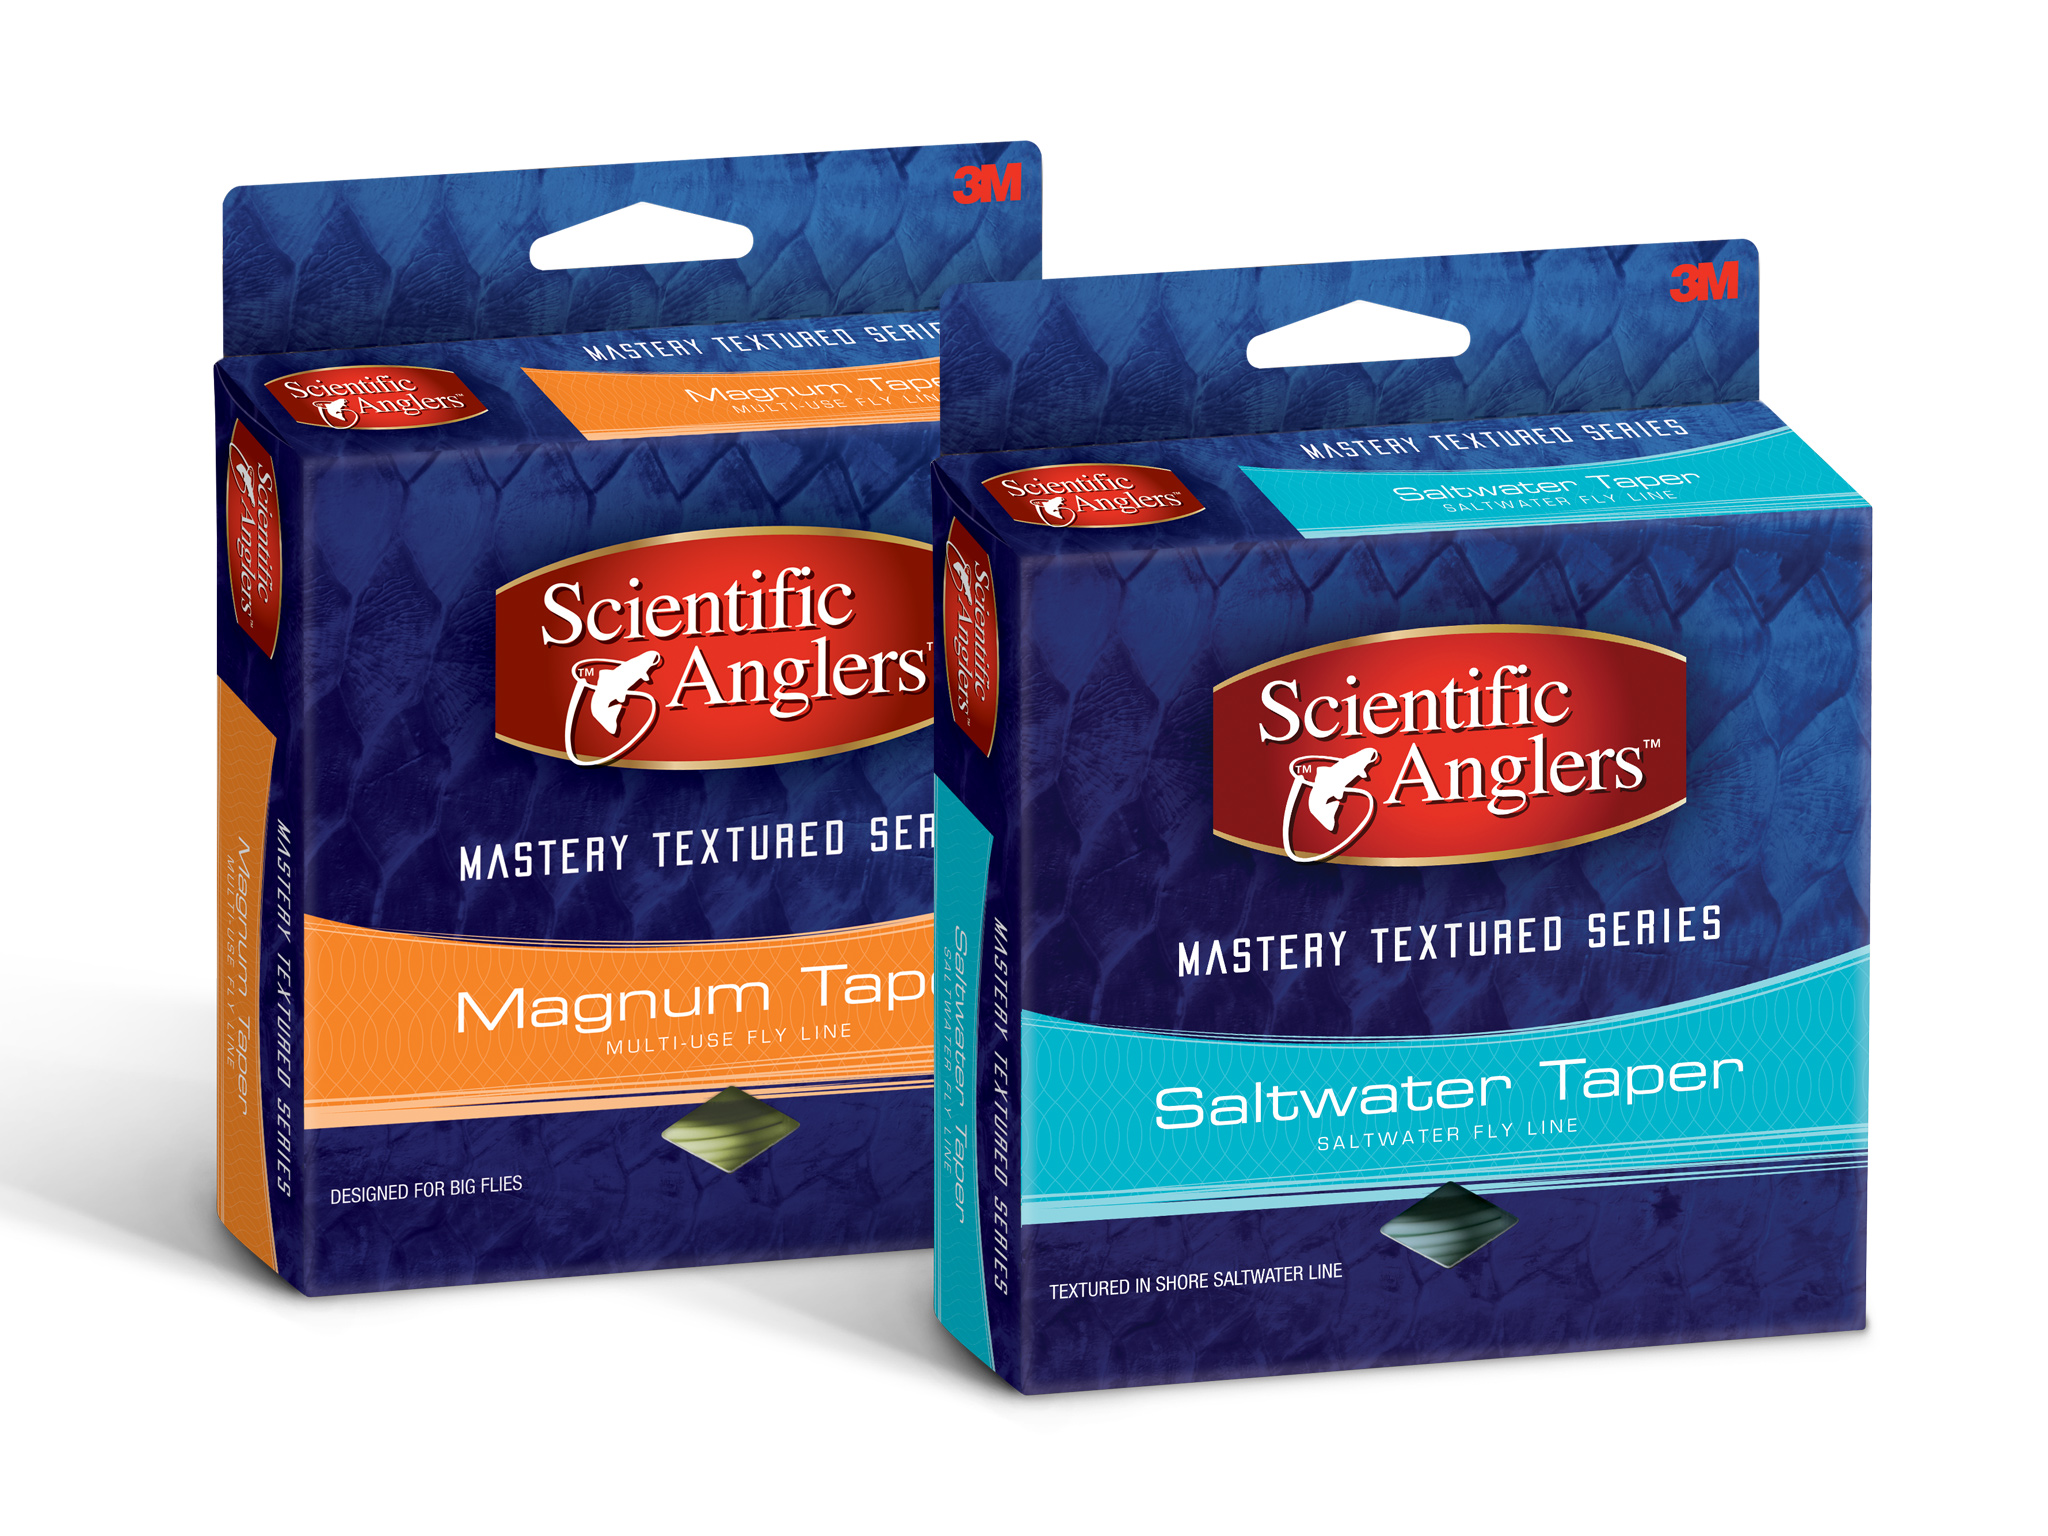 3M Scientific Anglers Mastery Textured Packaging